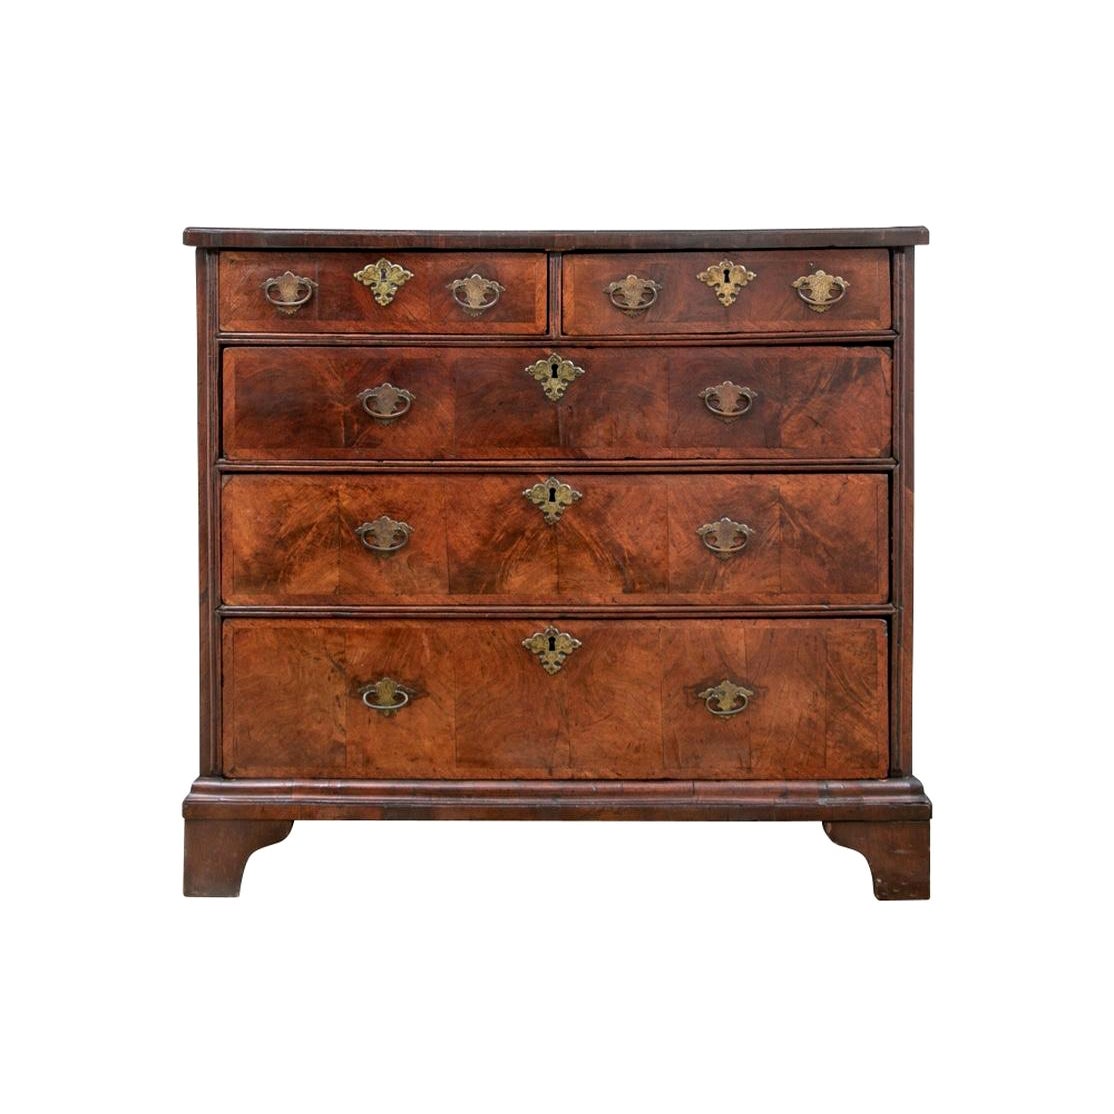 Fine 18th/19th C. Continental Figured Wood Chest Of Drawers